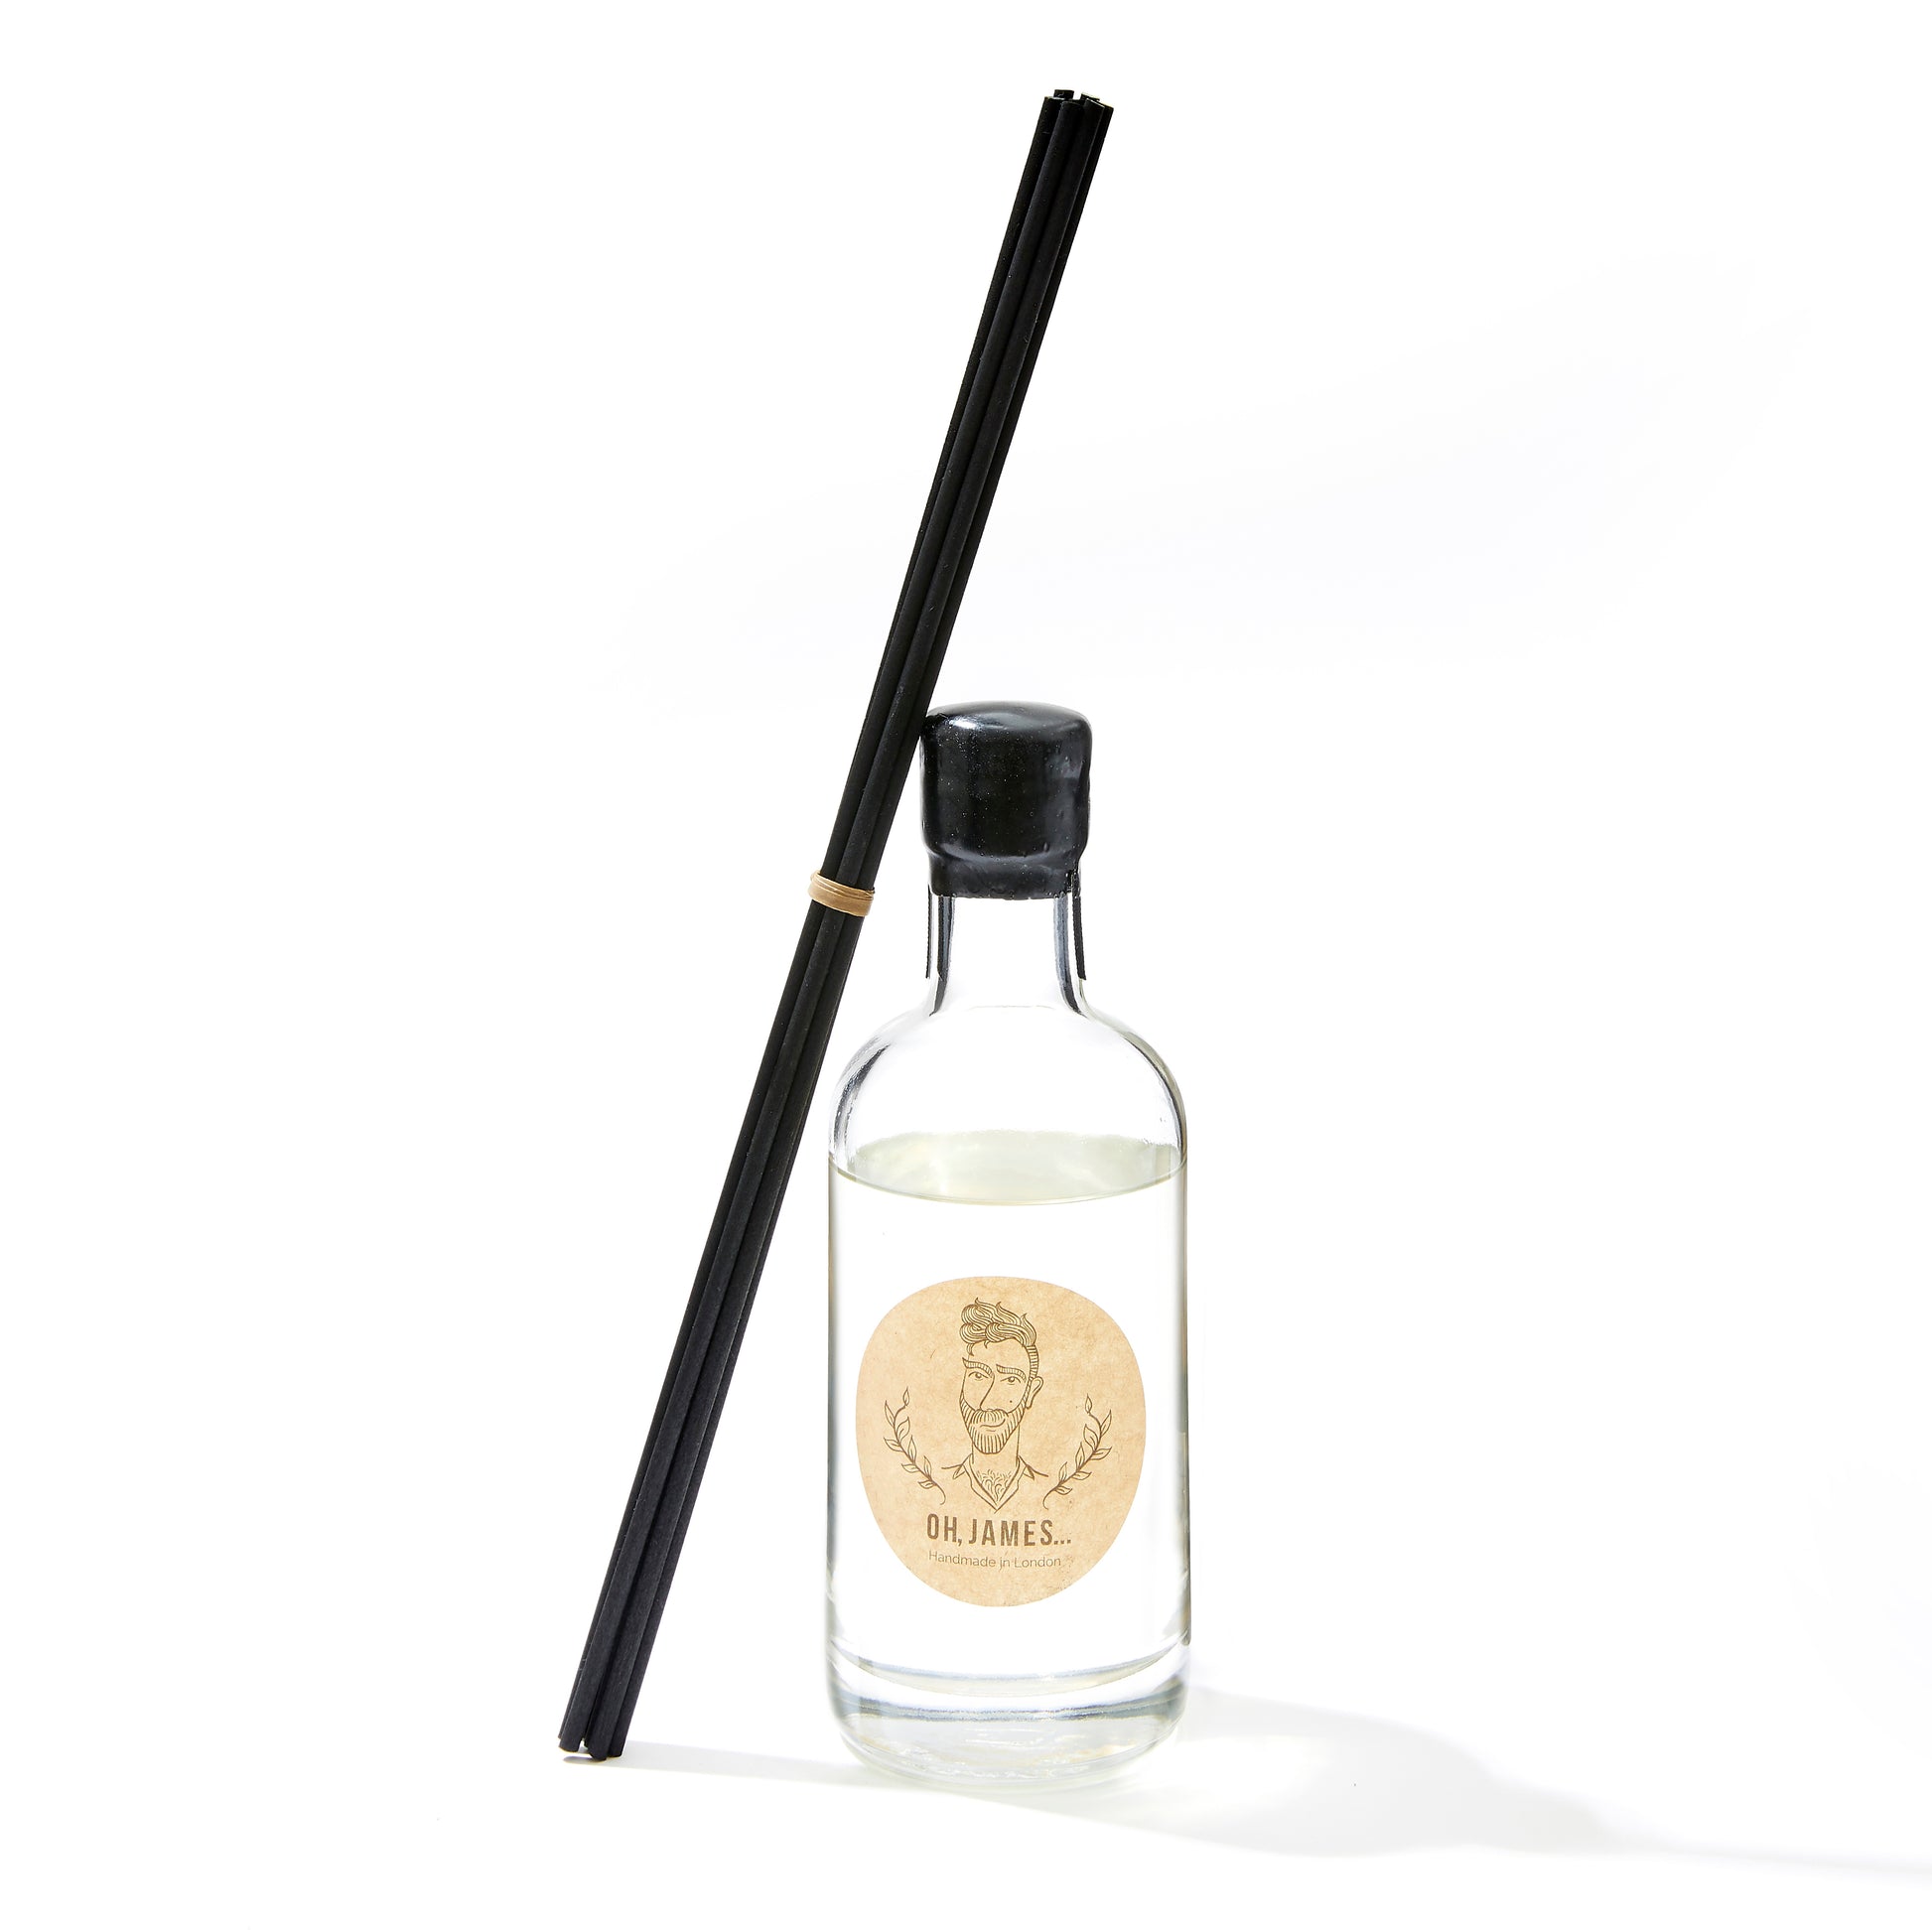 Oh, James... Reed Diffusers - OH, JAMES...